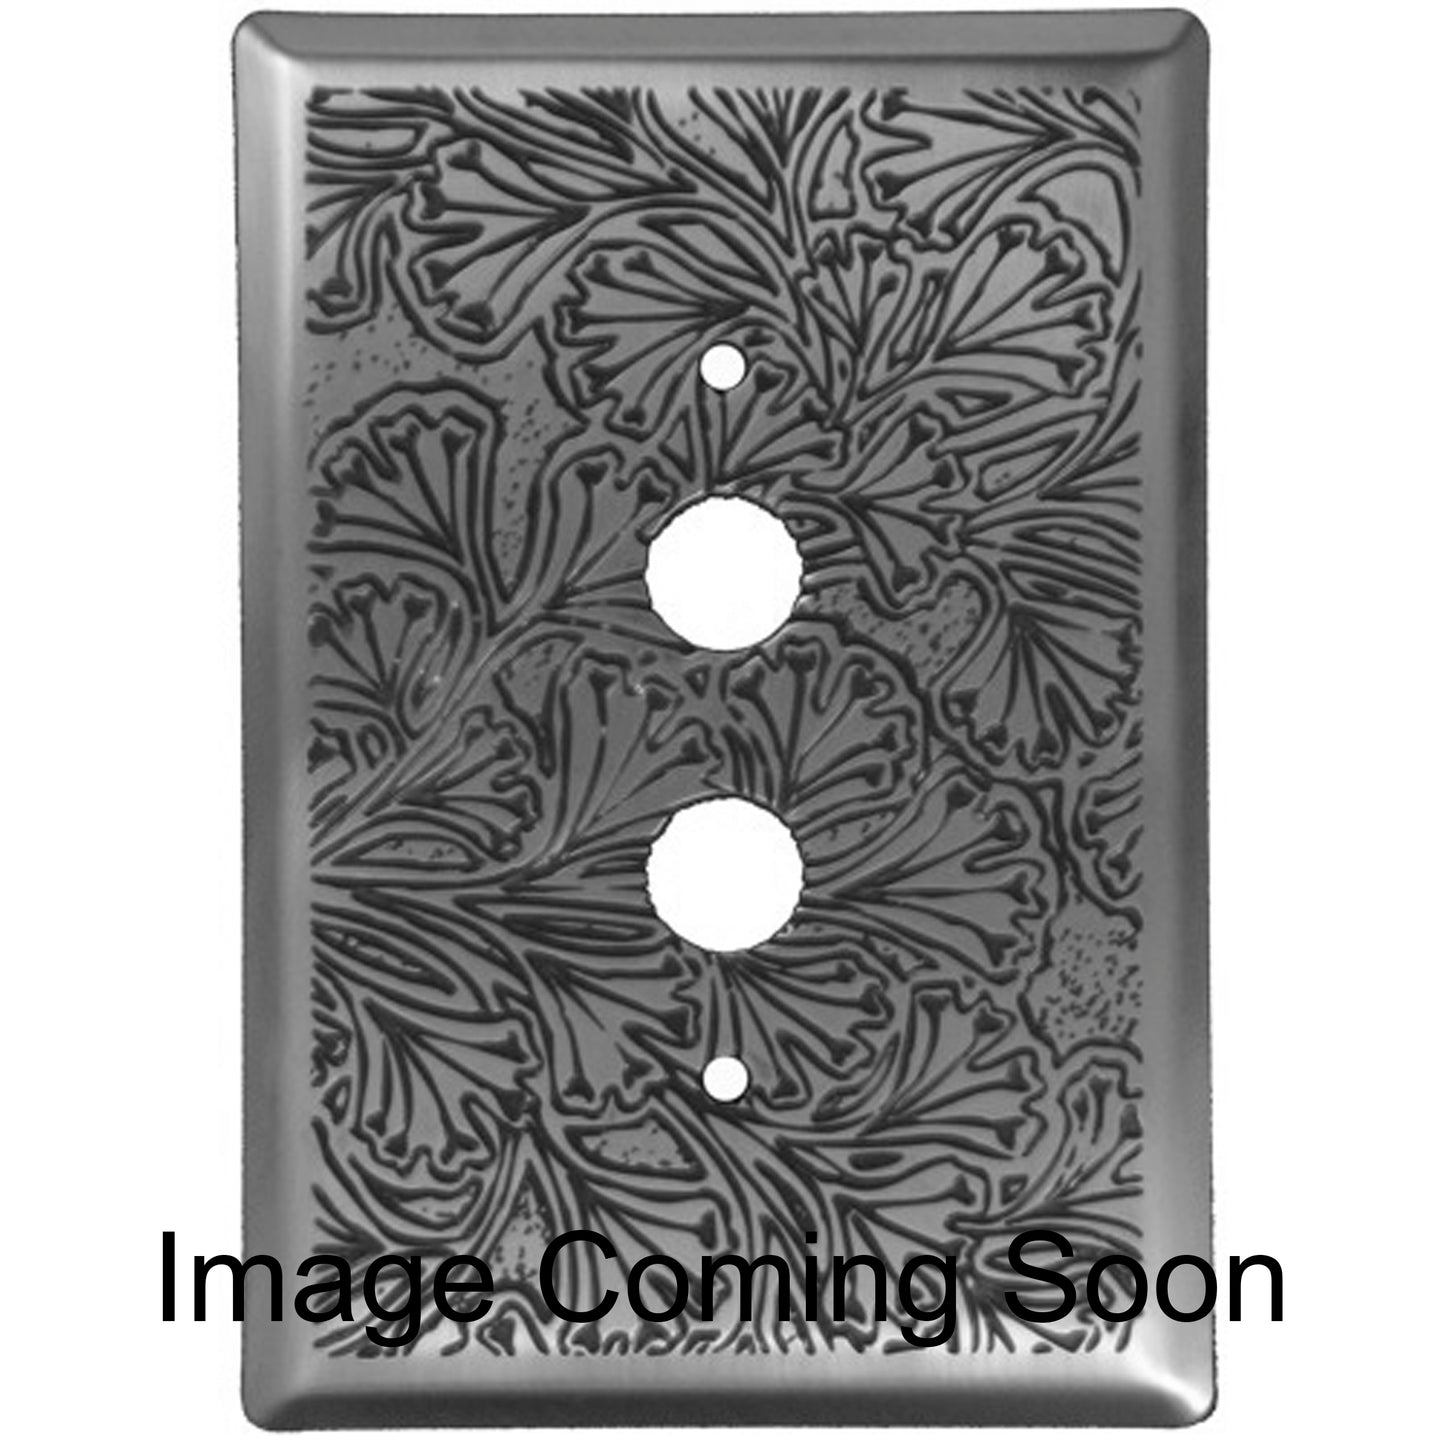 Maidenhaire Fern Stainless Steel 1 Pushbutton Switchplate